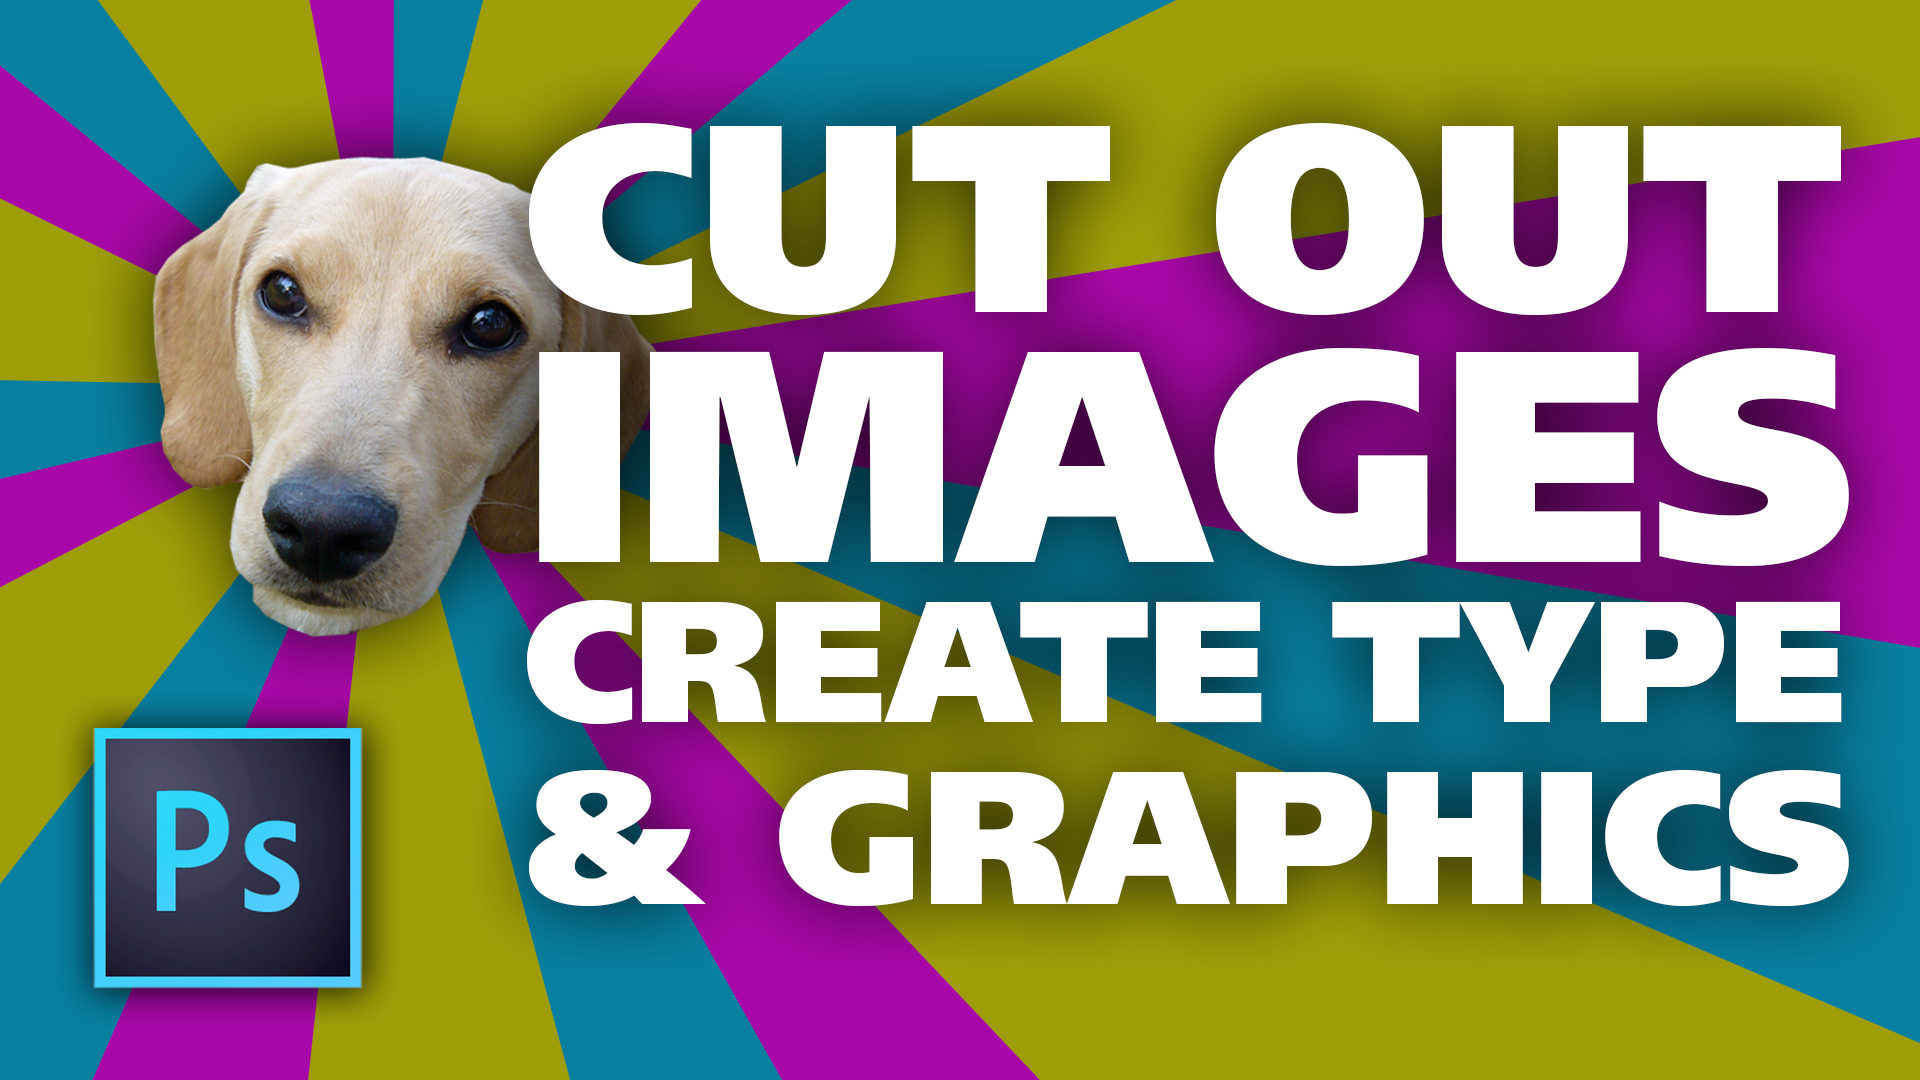 Photoshop: Cut Out Images, Create Graphics & Type #meme